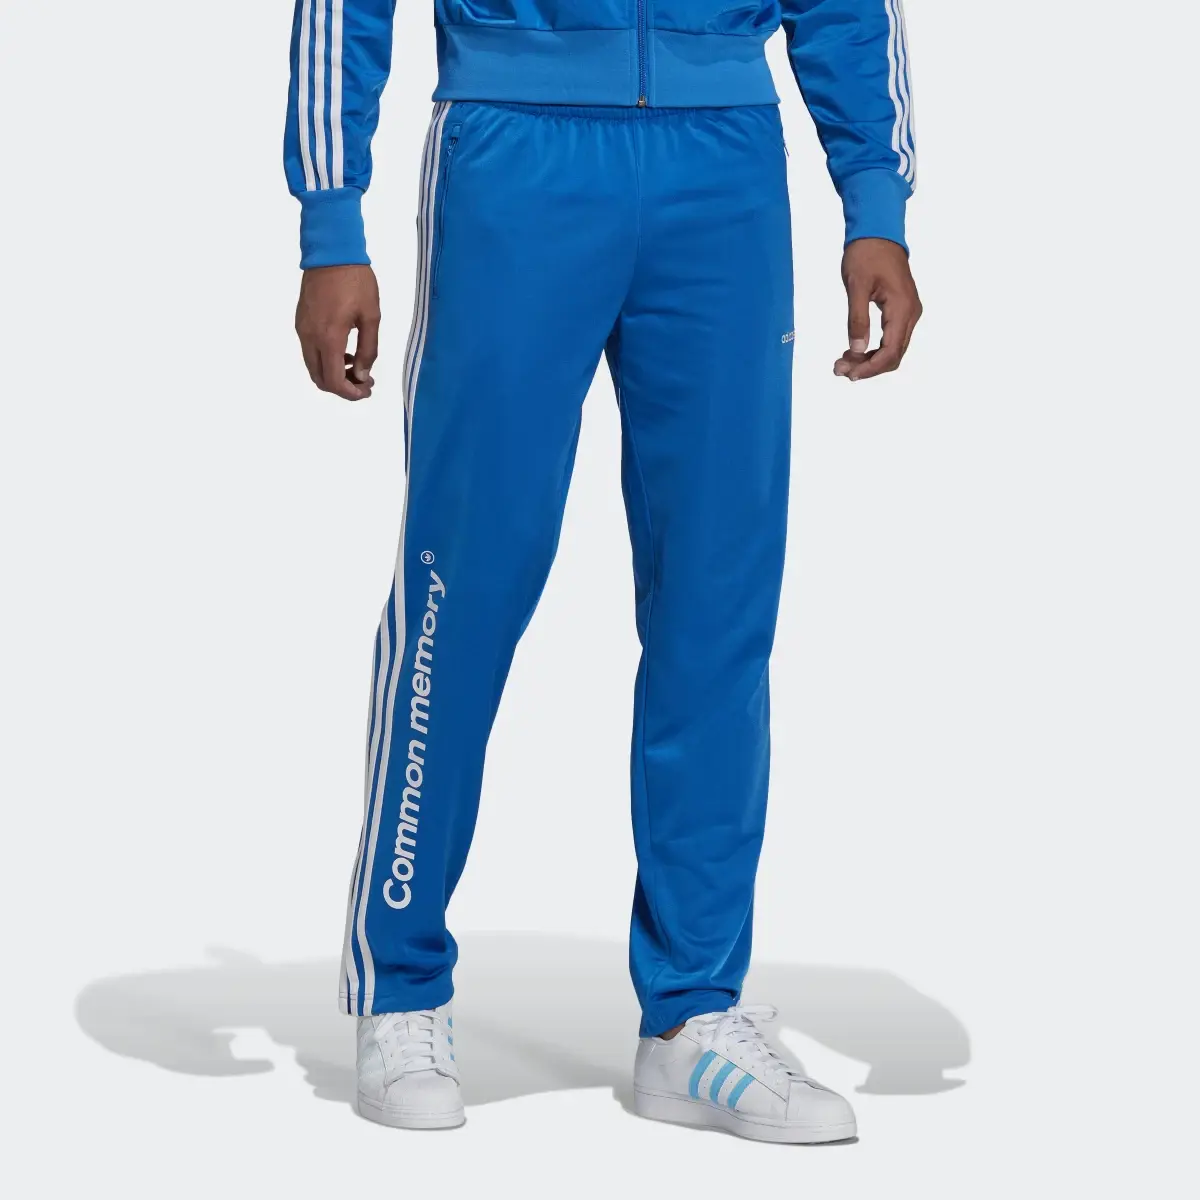 Adidas Graphic Common Memory Tracksuit Bottoms. 1